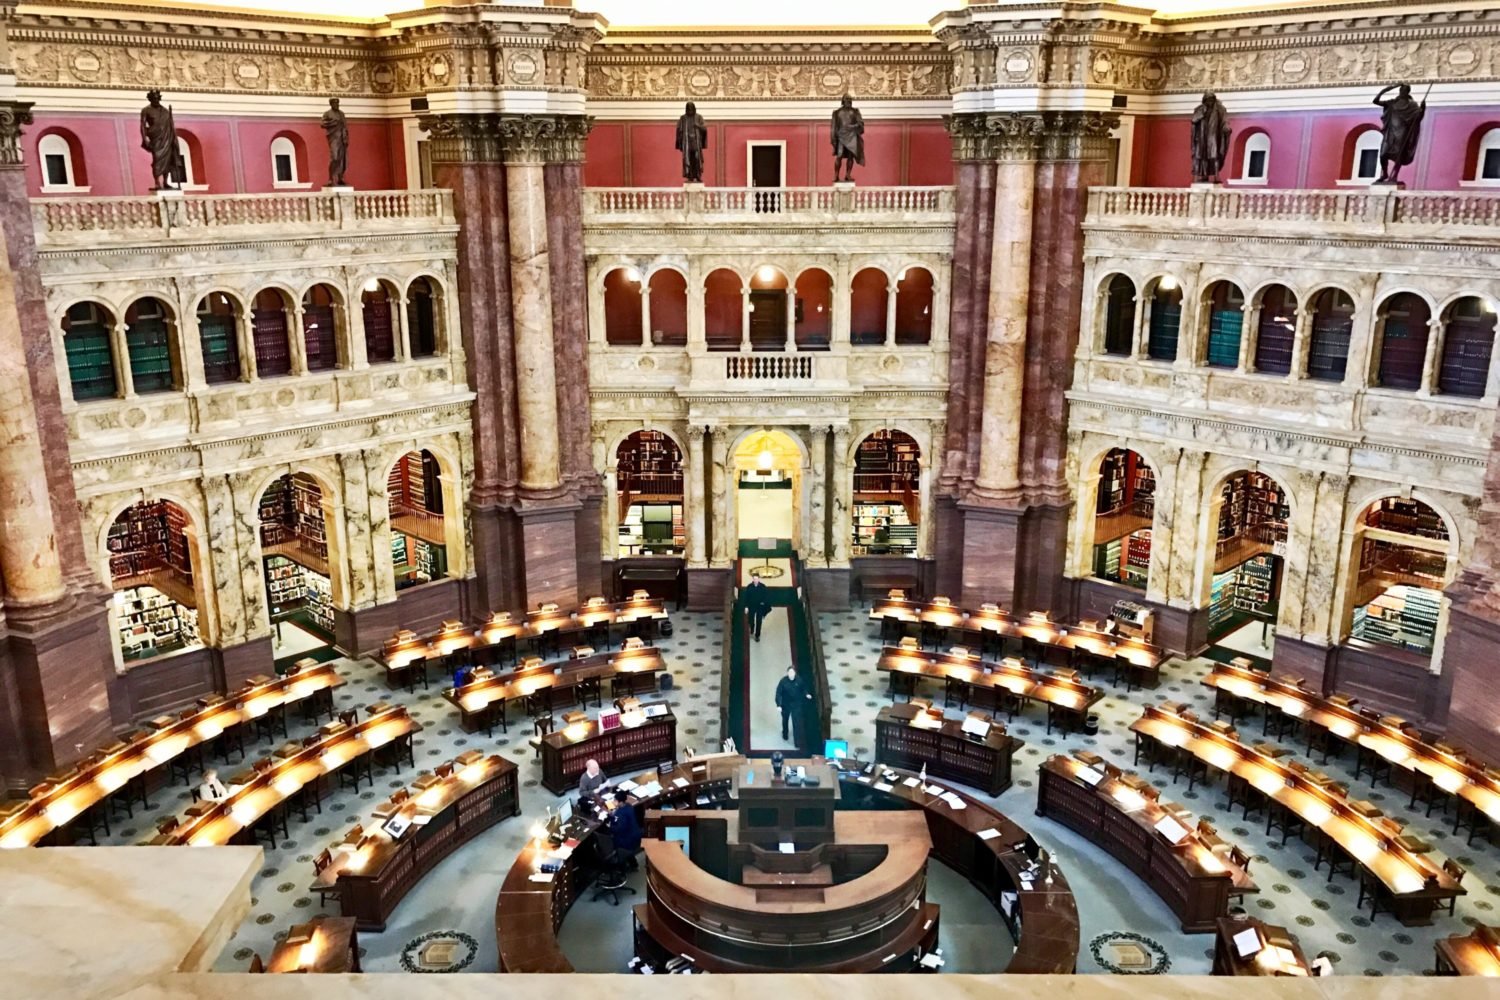 Library of Congress. Photograph by Northfielder/Flickr.